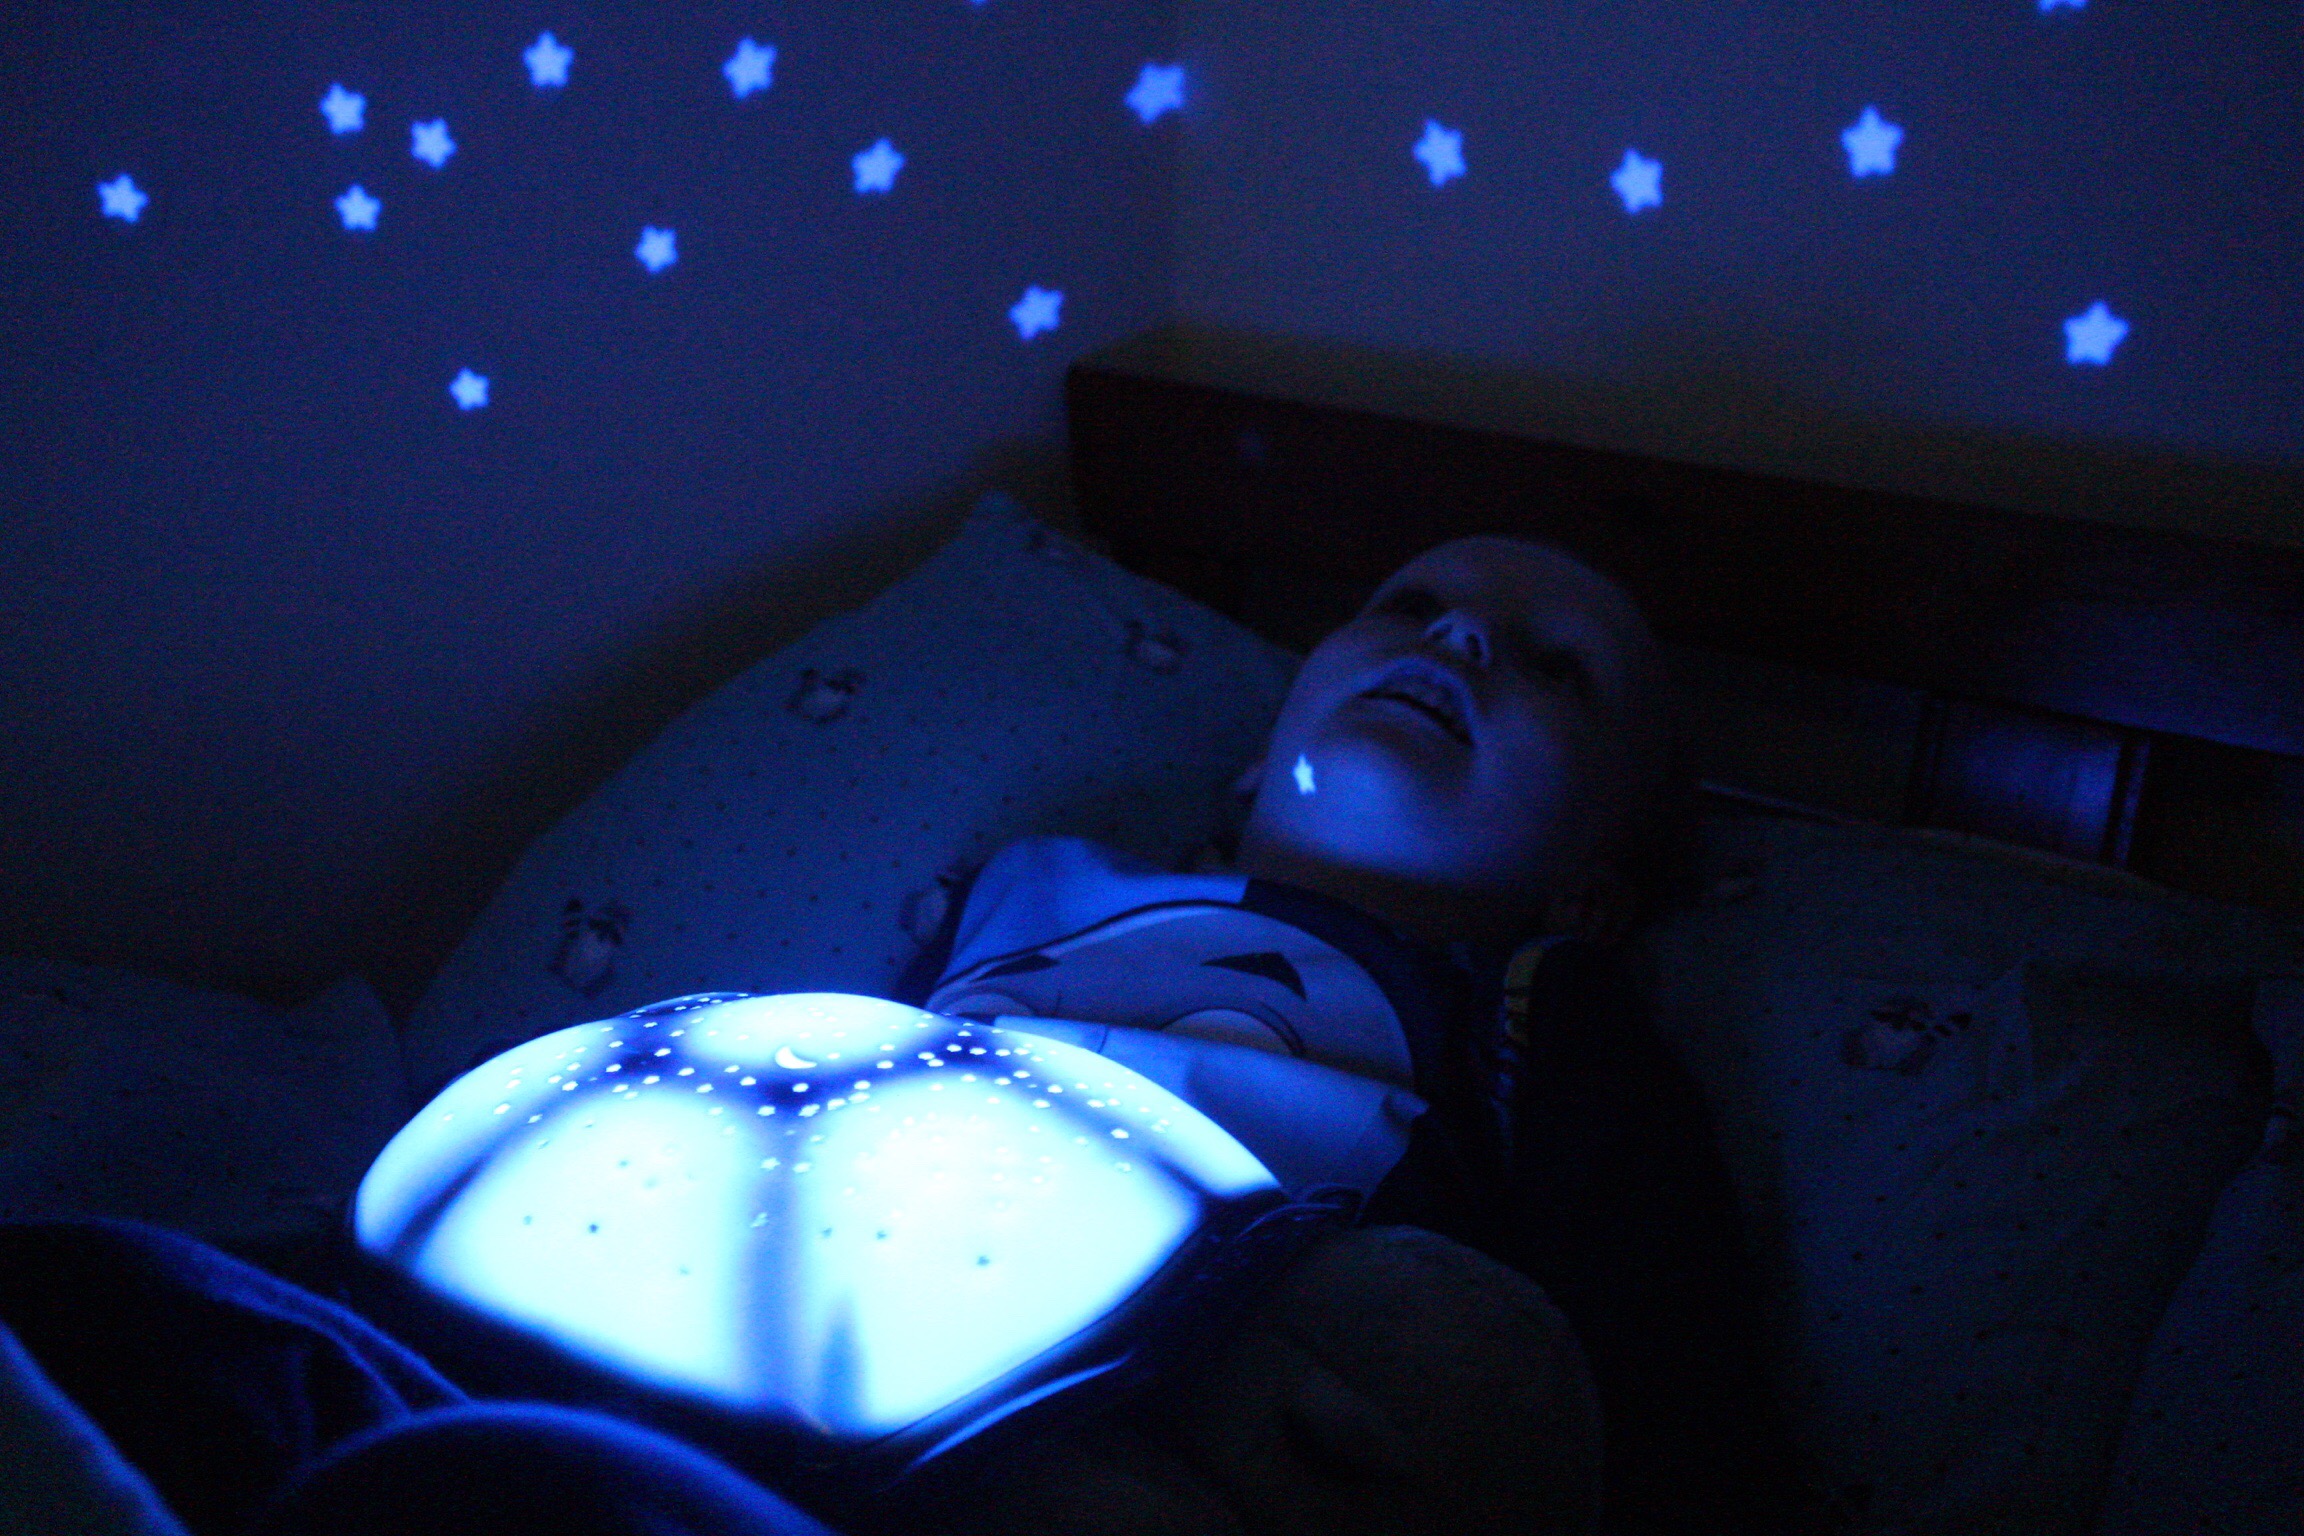 A turtle nightlight in use shining blue in the room. 